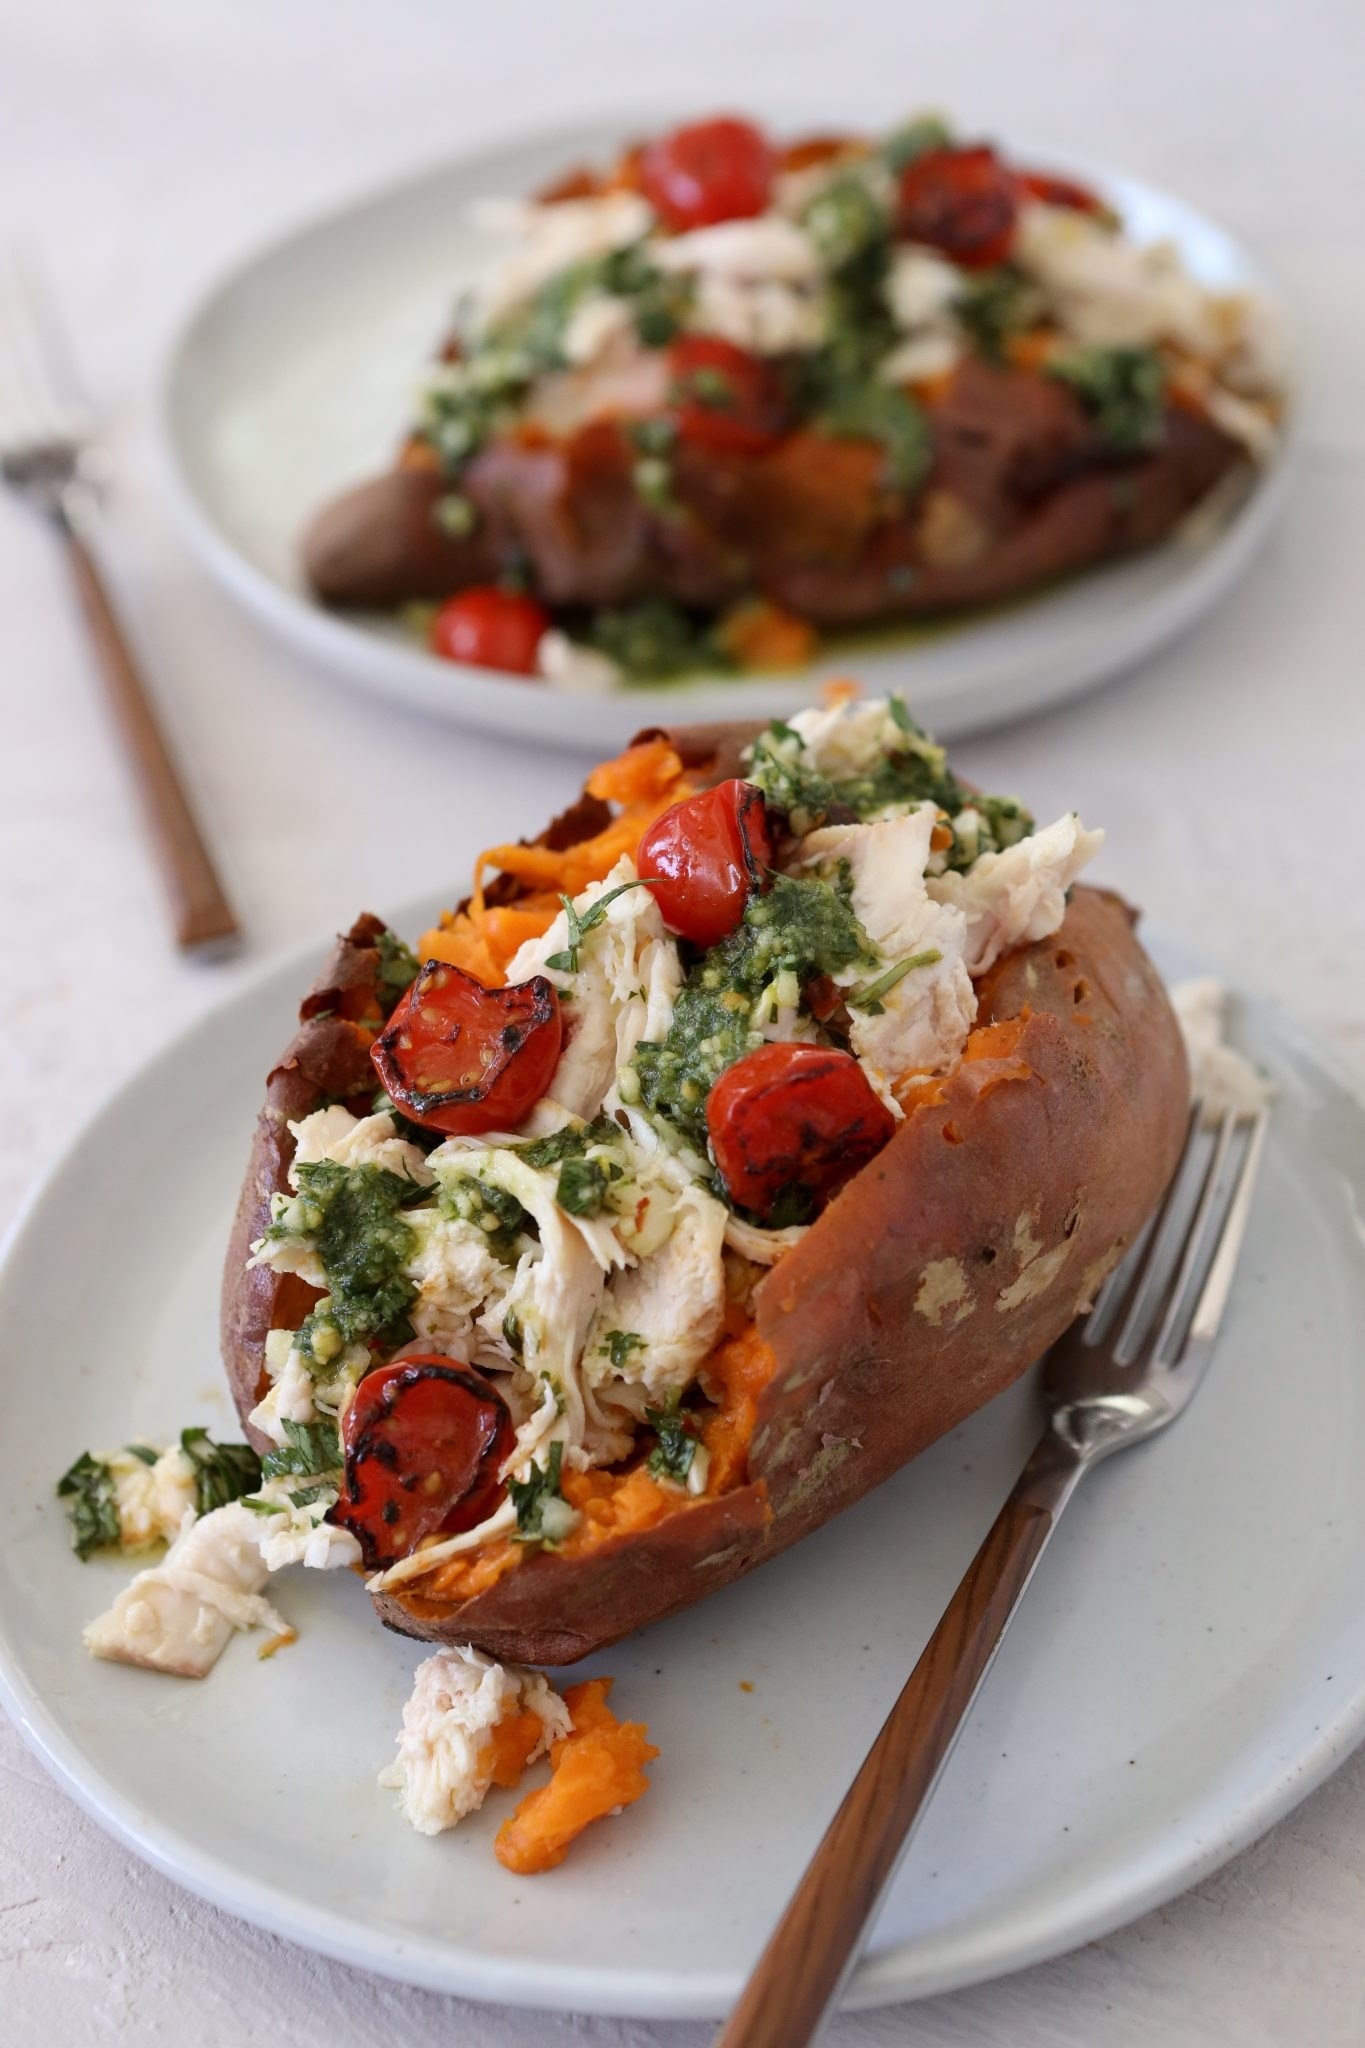 A sweet potato stuffed with chicken, pesto, and tomatoes.